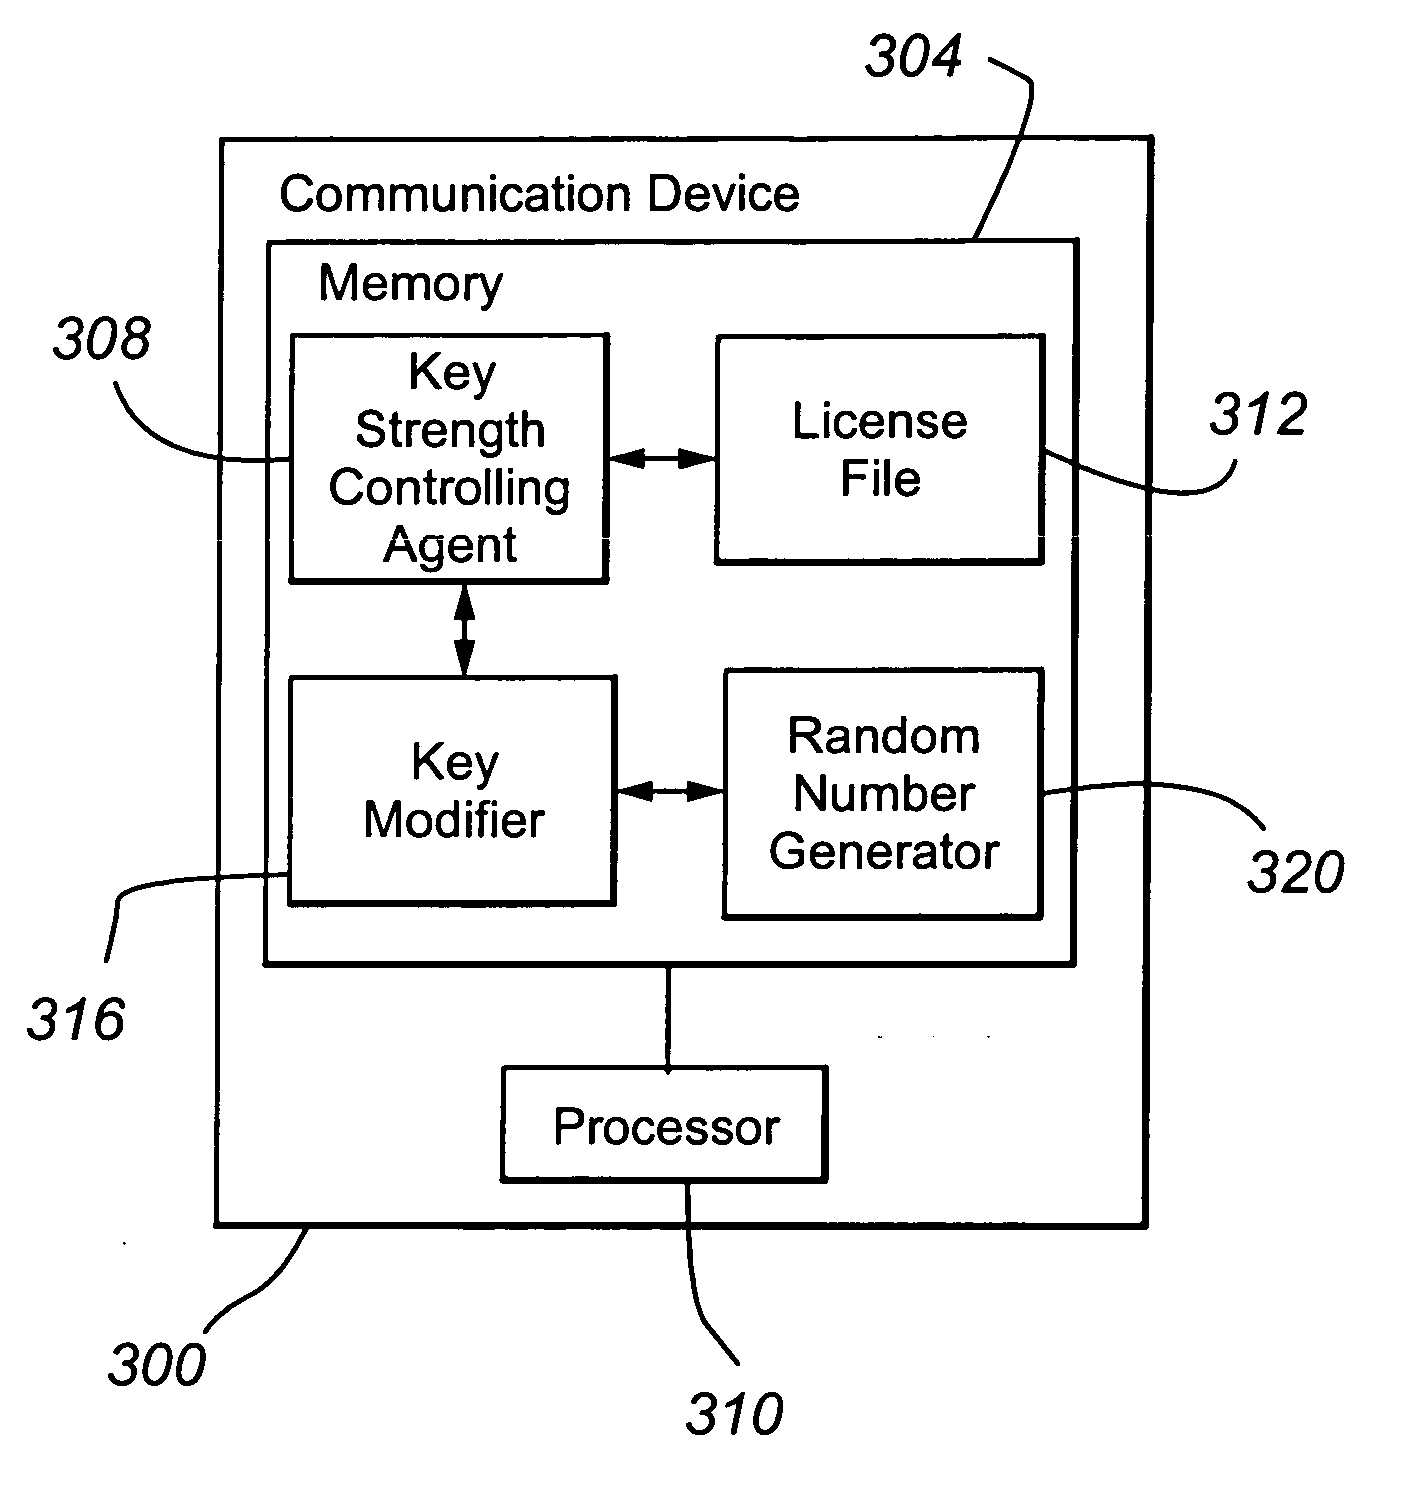 Method for undetectably impeding key strength of encryption usage for products exported outside the U.S.